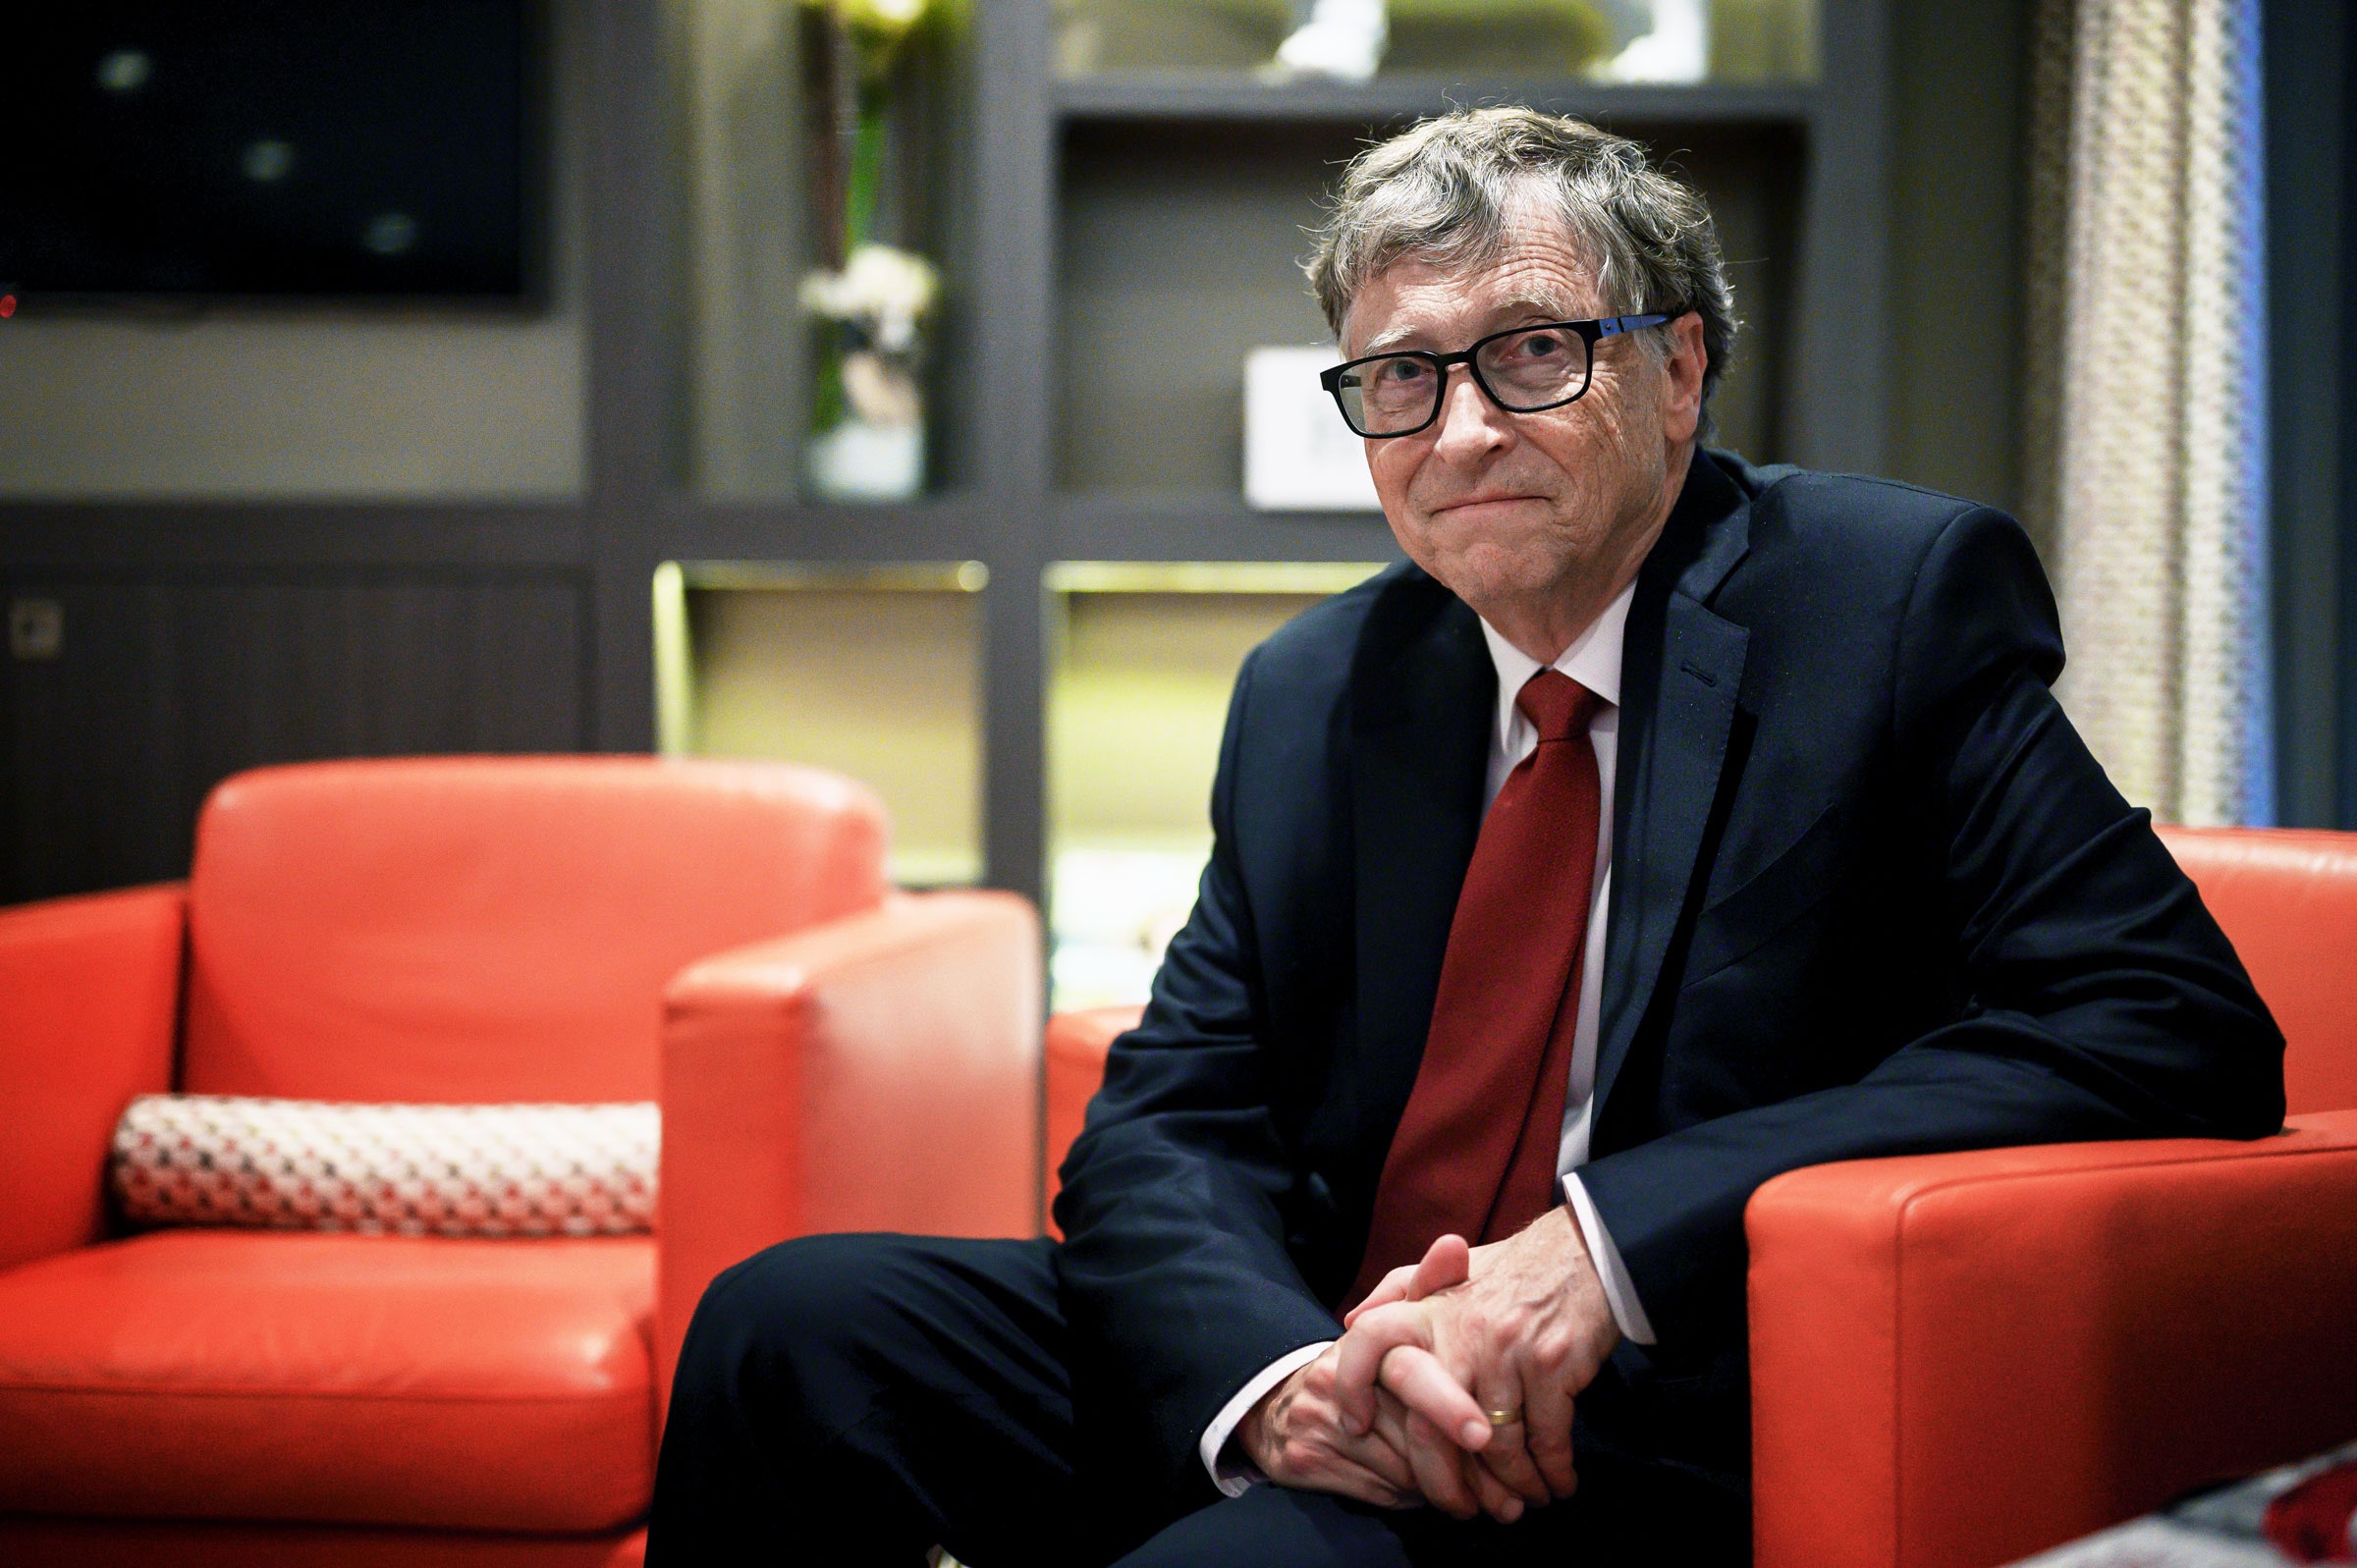 Covid risks have ‘dramatically reduced’ but another pandemic is coming: Bill Gates